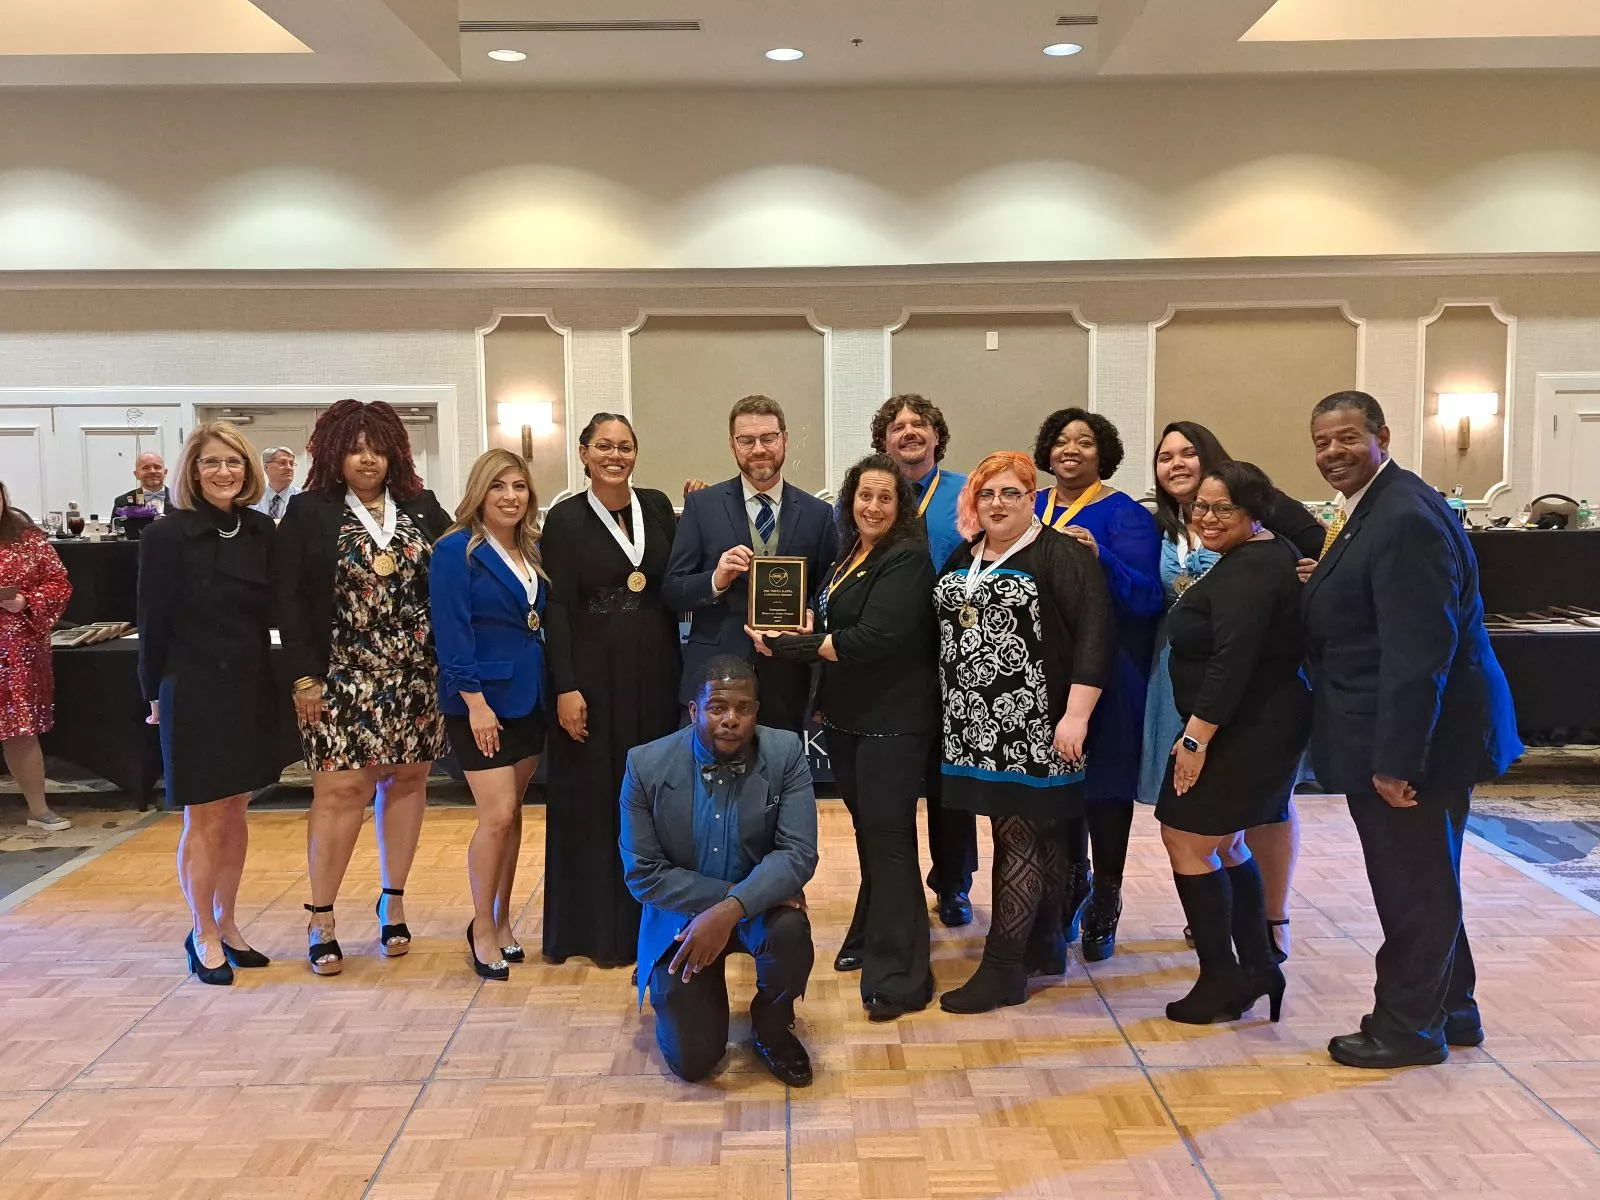 Phi Theta Kappa standing with MTC President and staff holding award and smiling in a ballroom.